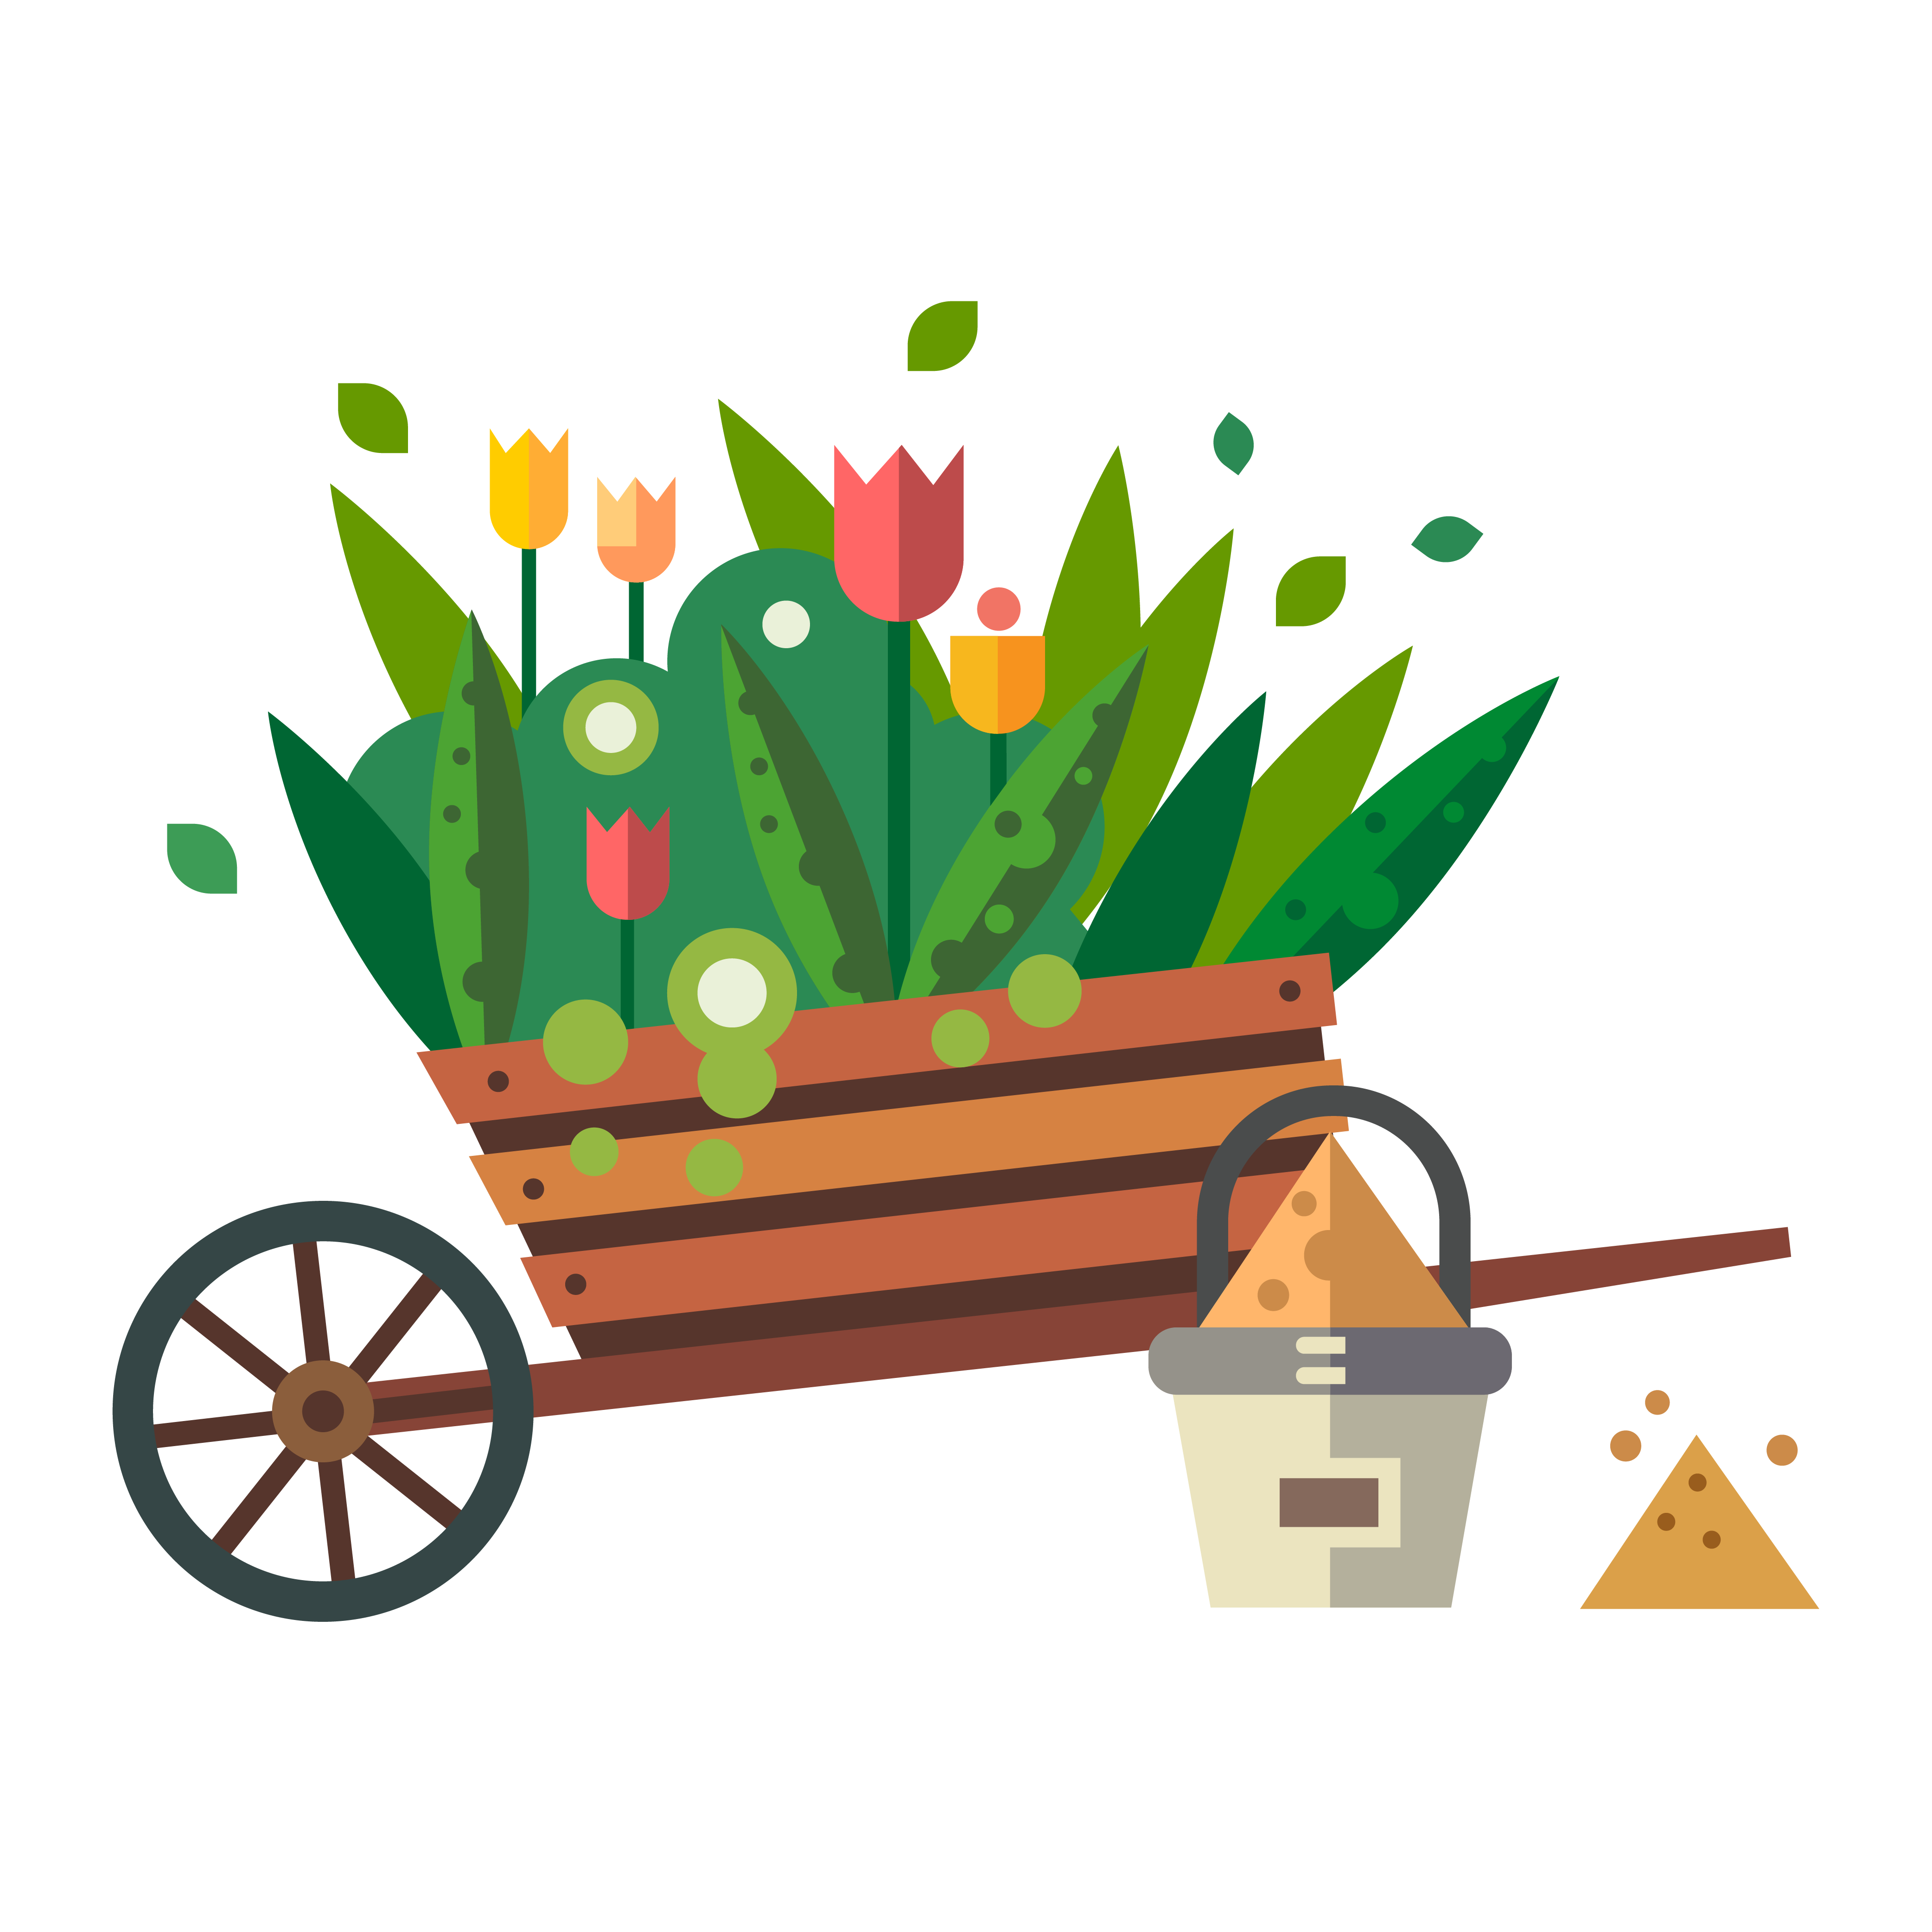 landscaping-clipart-landscaping-tool-landscaping-landscaping-tool